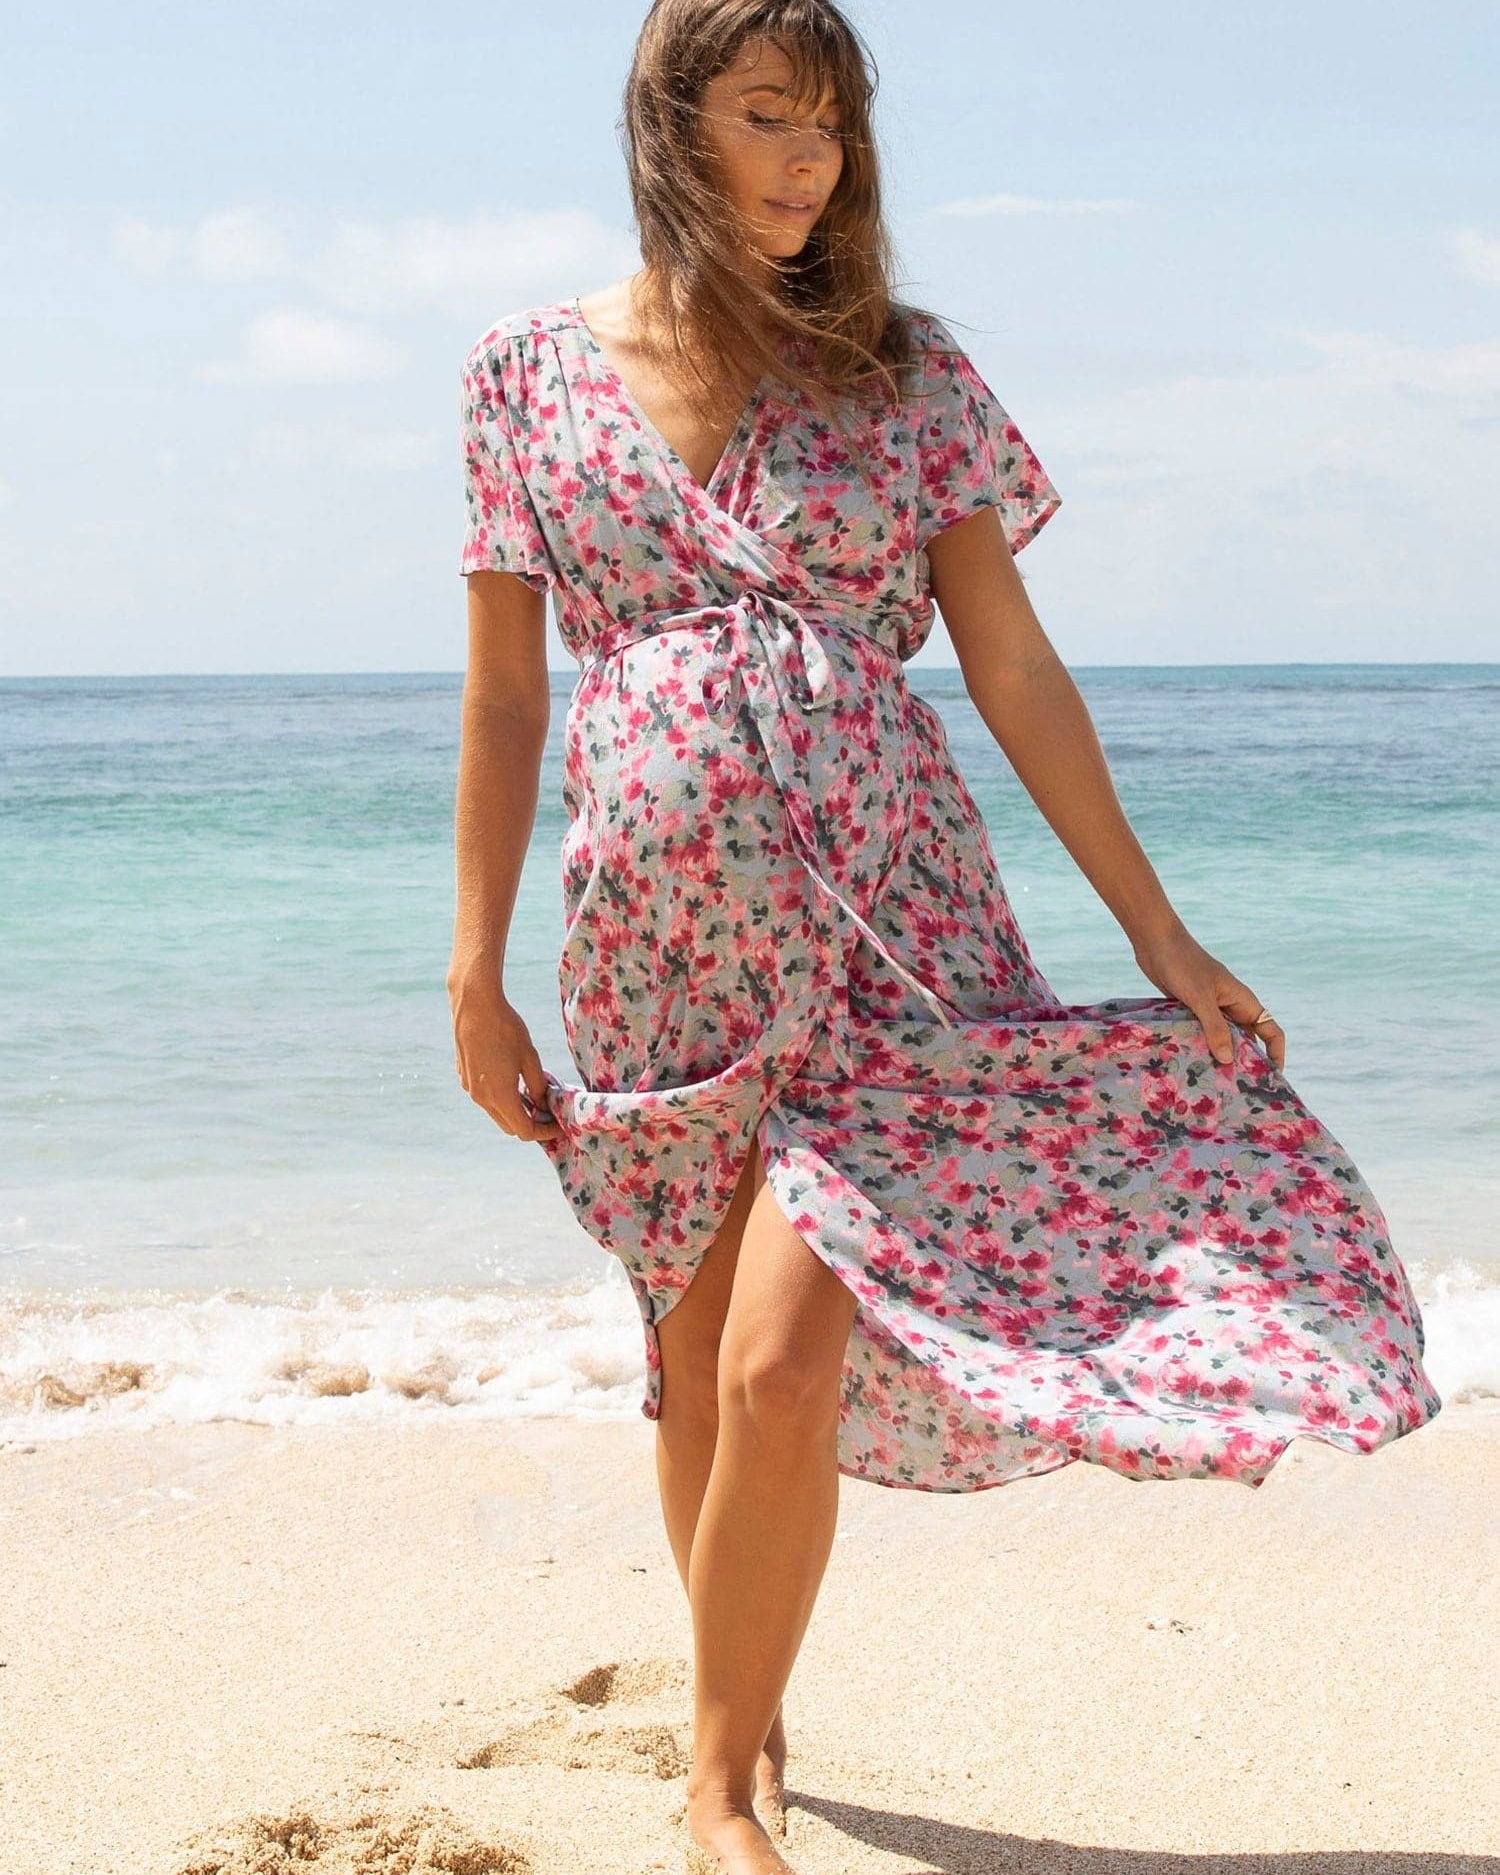 Main View - A pregnant Woman in Floral Pink Nursing Friendly Maternity Wrap Dress  on the Beach